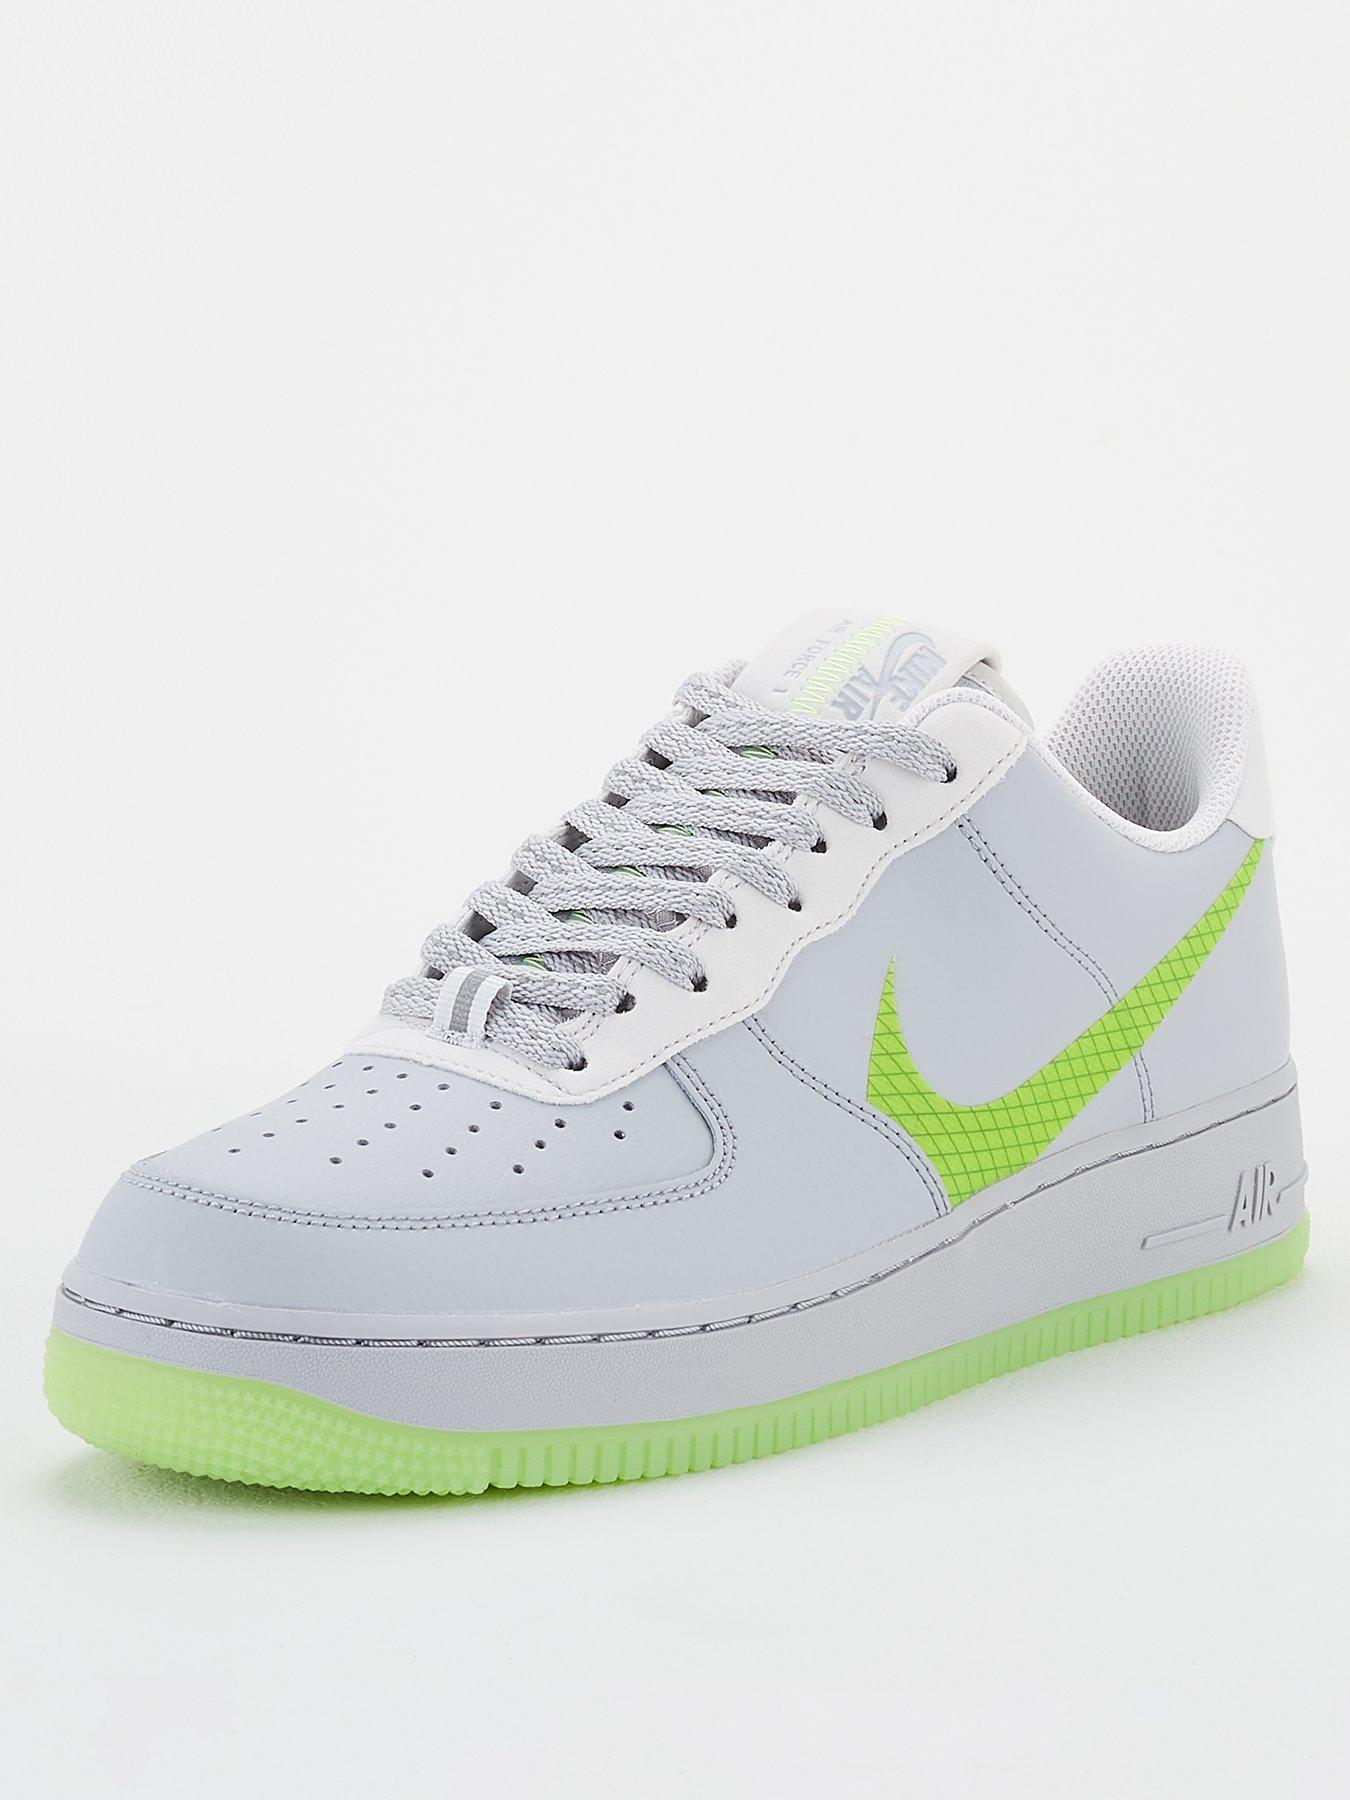 air force 1 gray and green